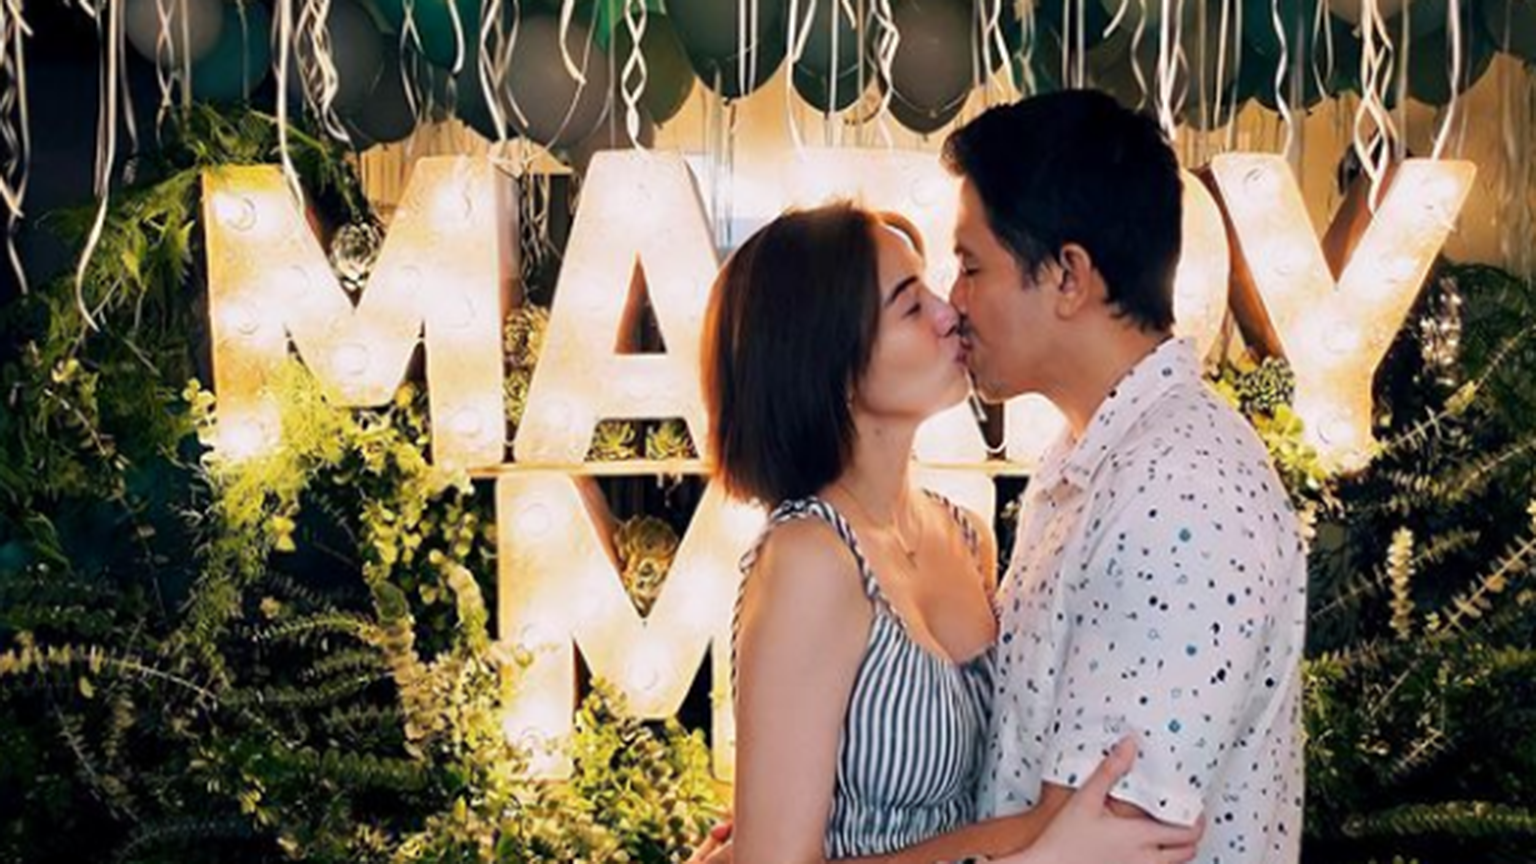 BATANGAS Before and after Luis Manzano, Dennis Trillo adores, gets engaged with Jennylyn Mercado